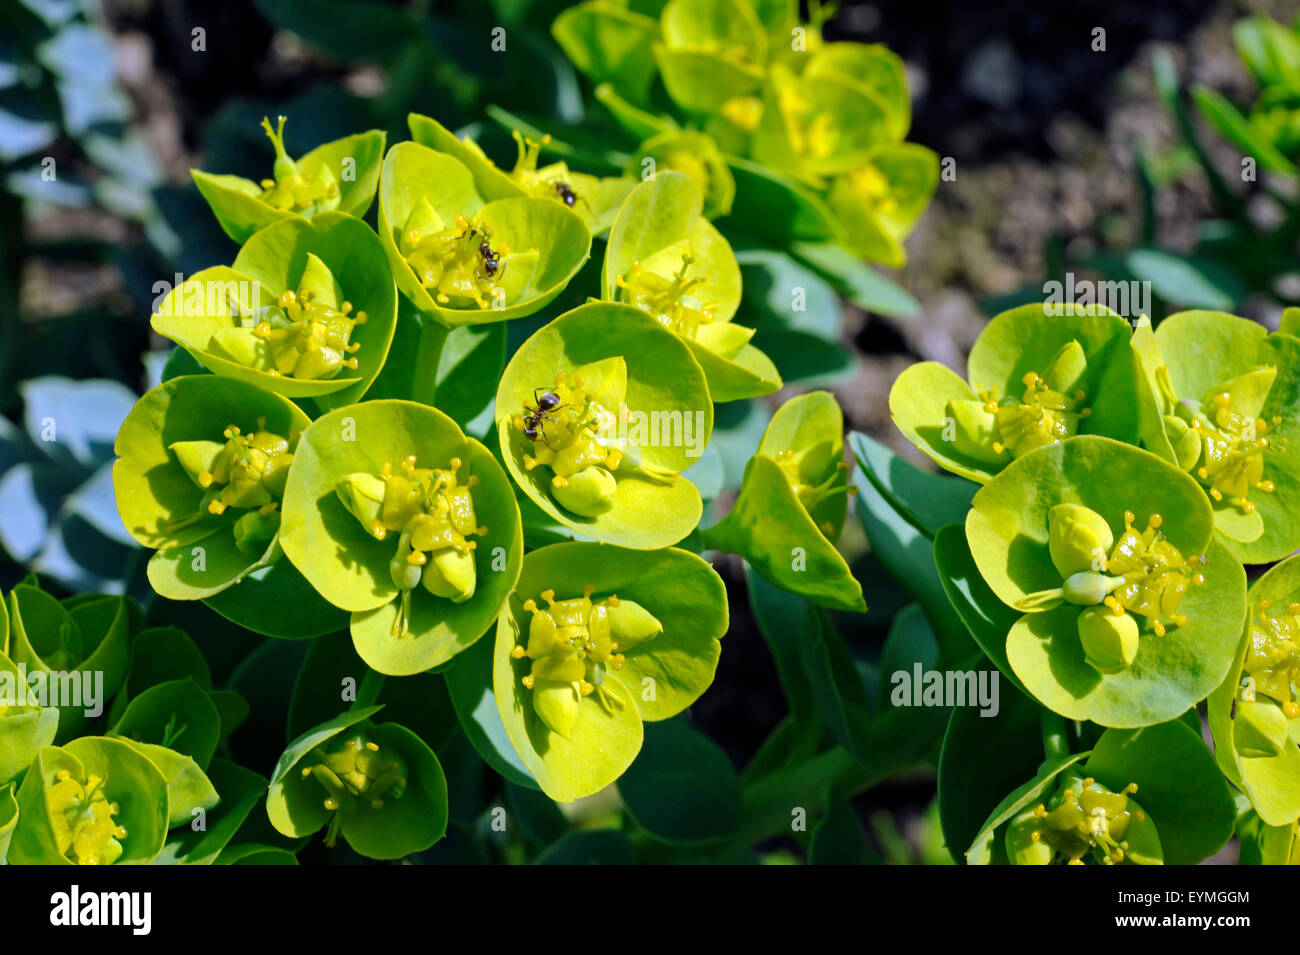 Multicolored spurge near insect visit blossoms at stone garden Stock Photo